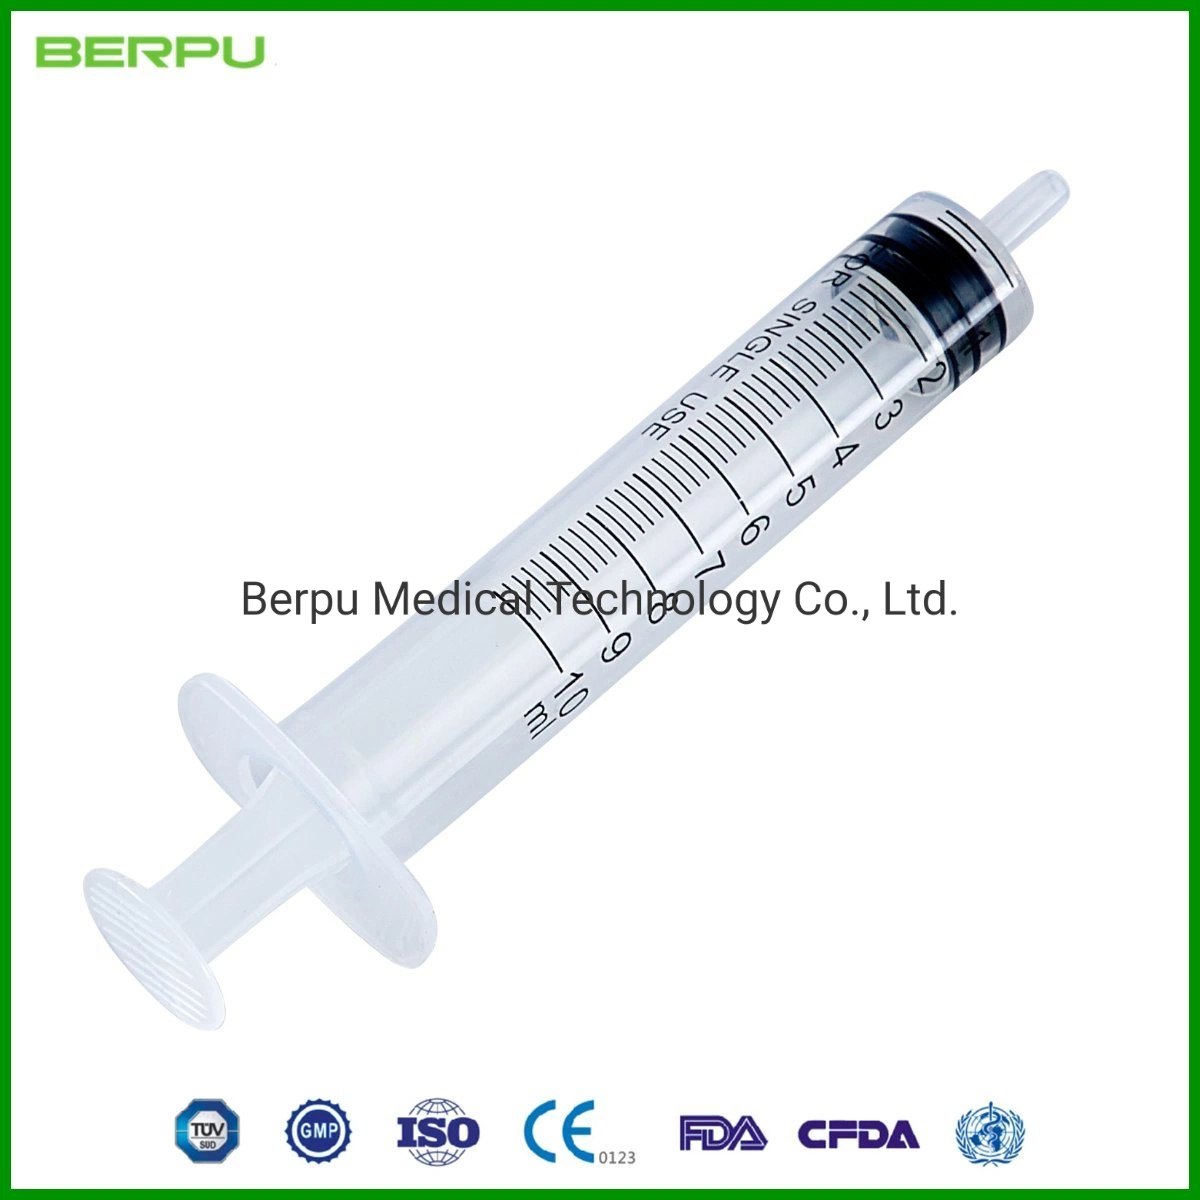 Berpu Eo Sterile Disposable Three Part Luer Lock Luer Slip Central Type Eccentric Type Hypodermic Syringe Injection Syringe with Size 1-60ml CE ISO FDA